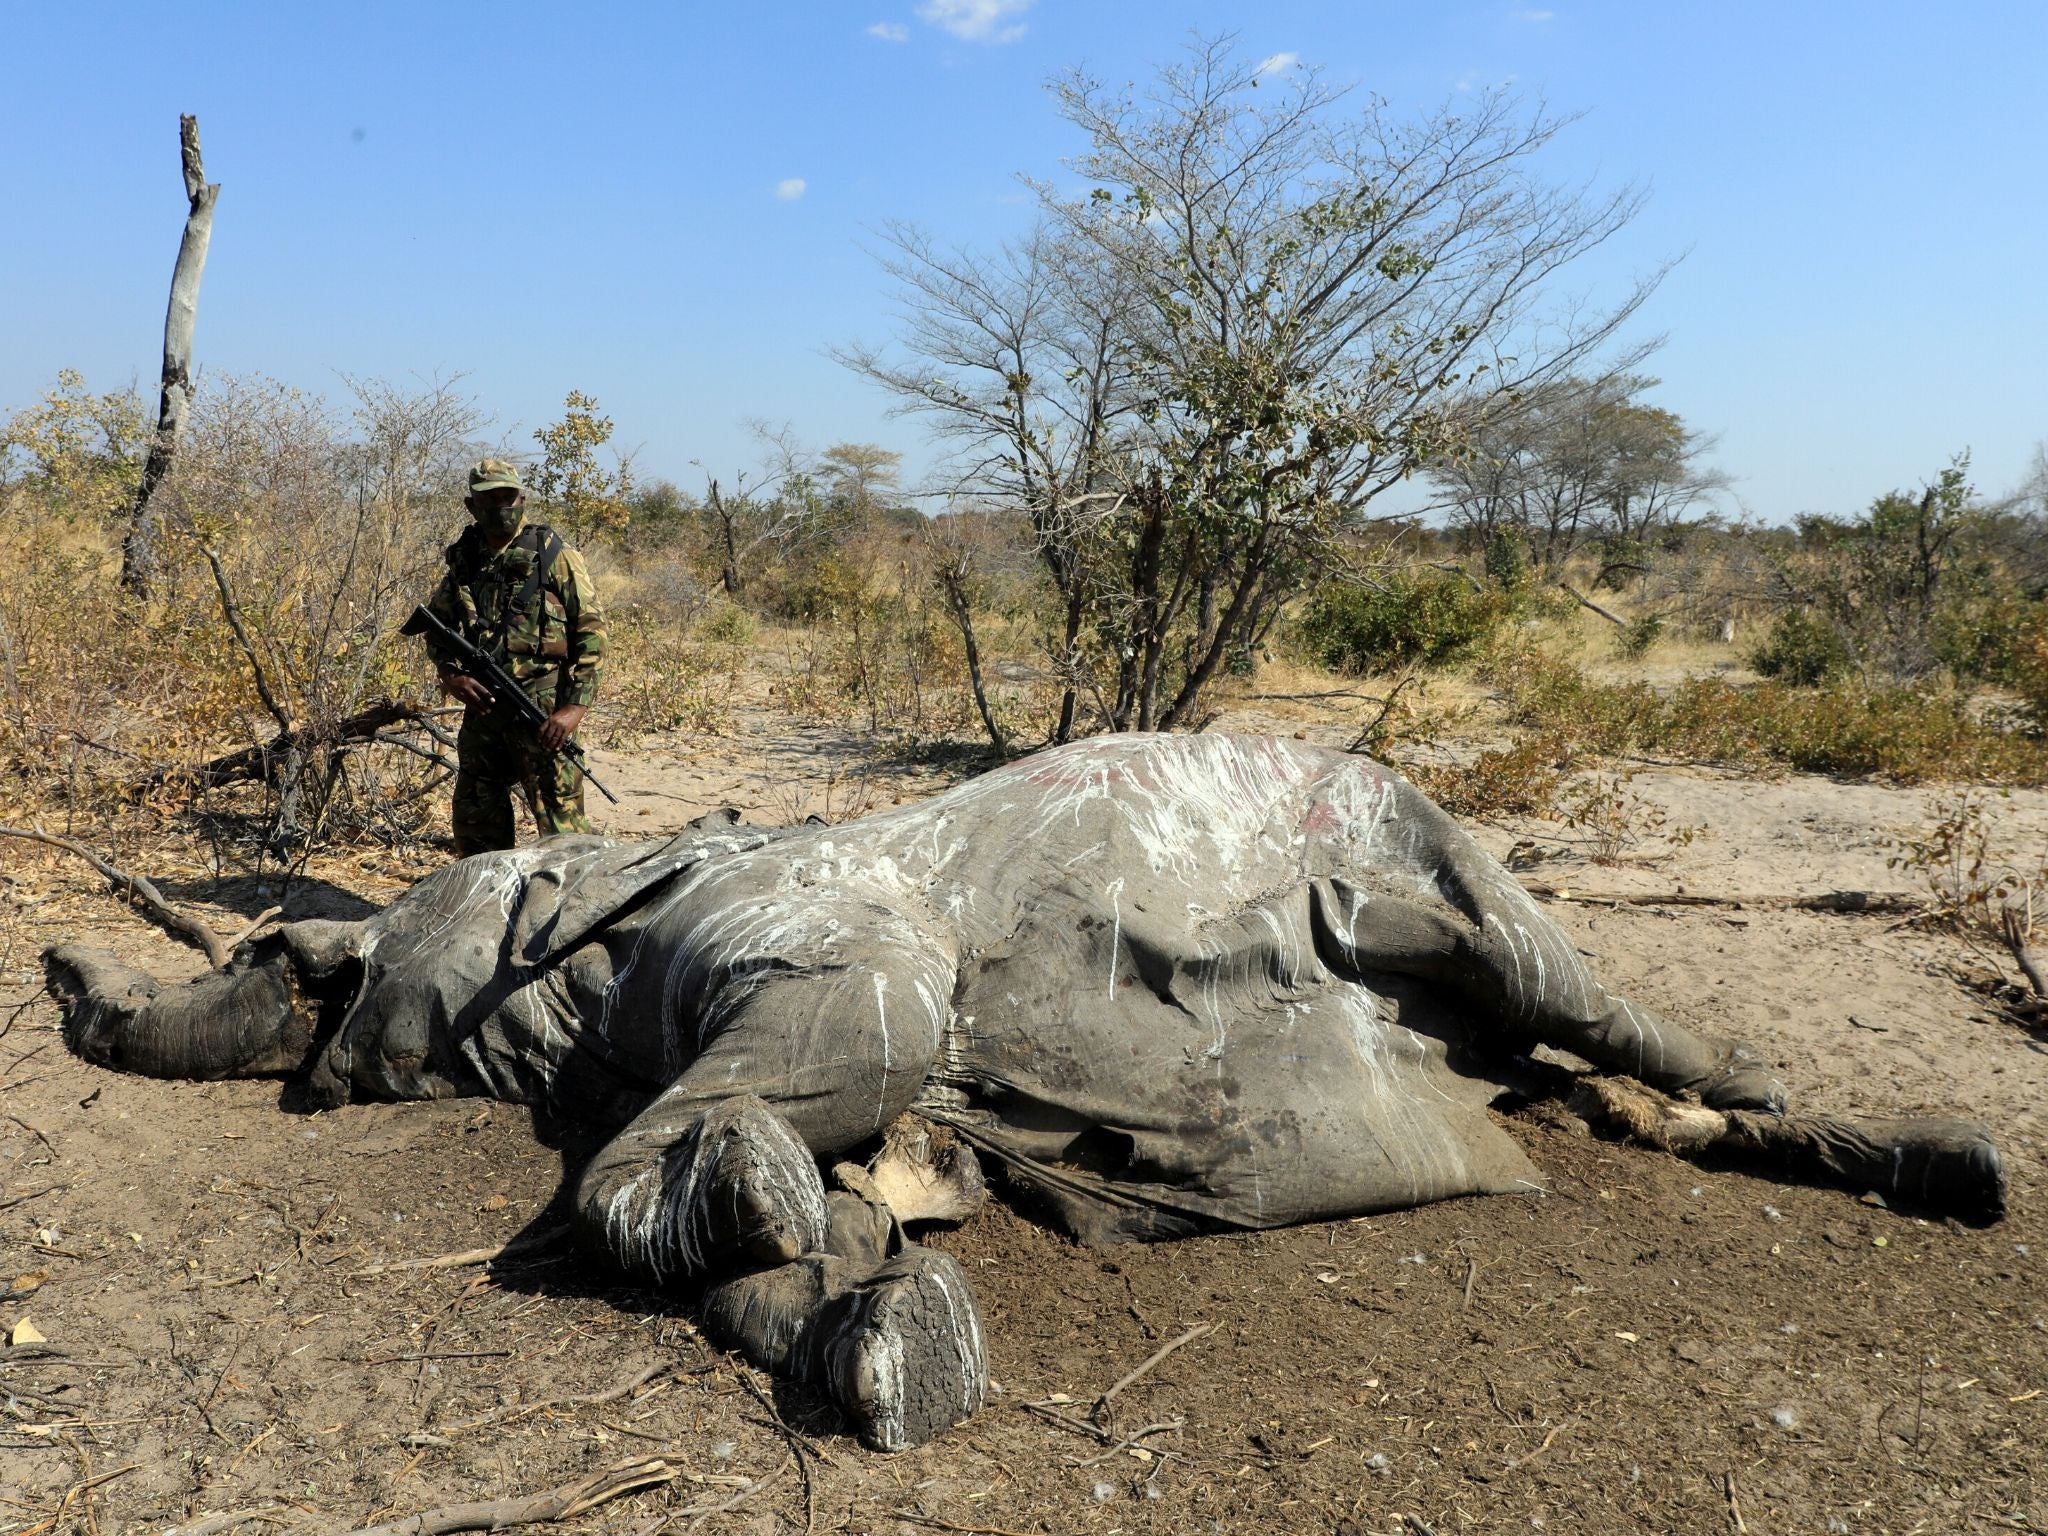 A member of the Botswana Defence Force Anti-Poaching Unit stands over an elephant carcass found near Seronga, in the Okavango Delta on 9 July